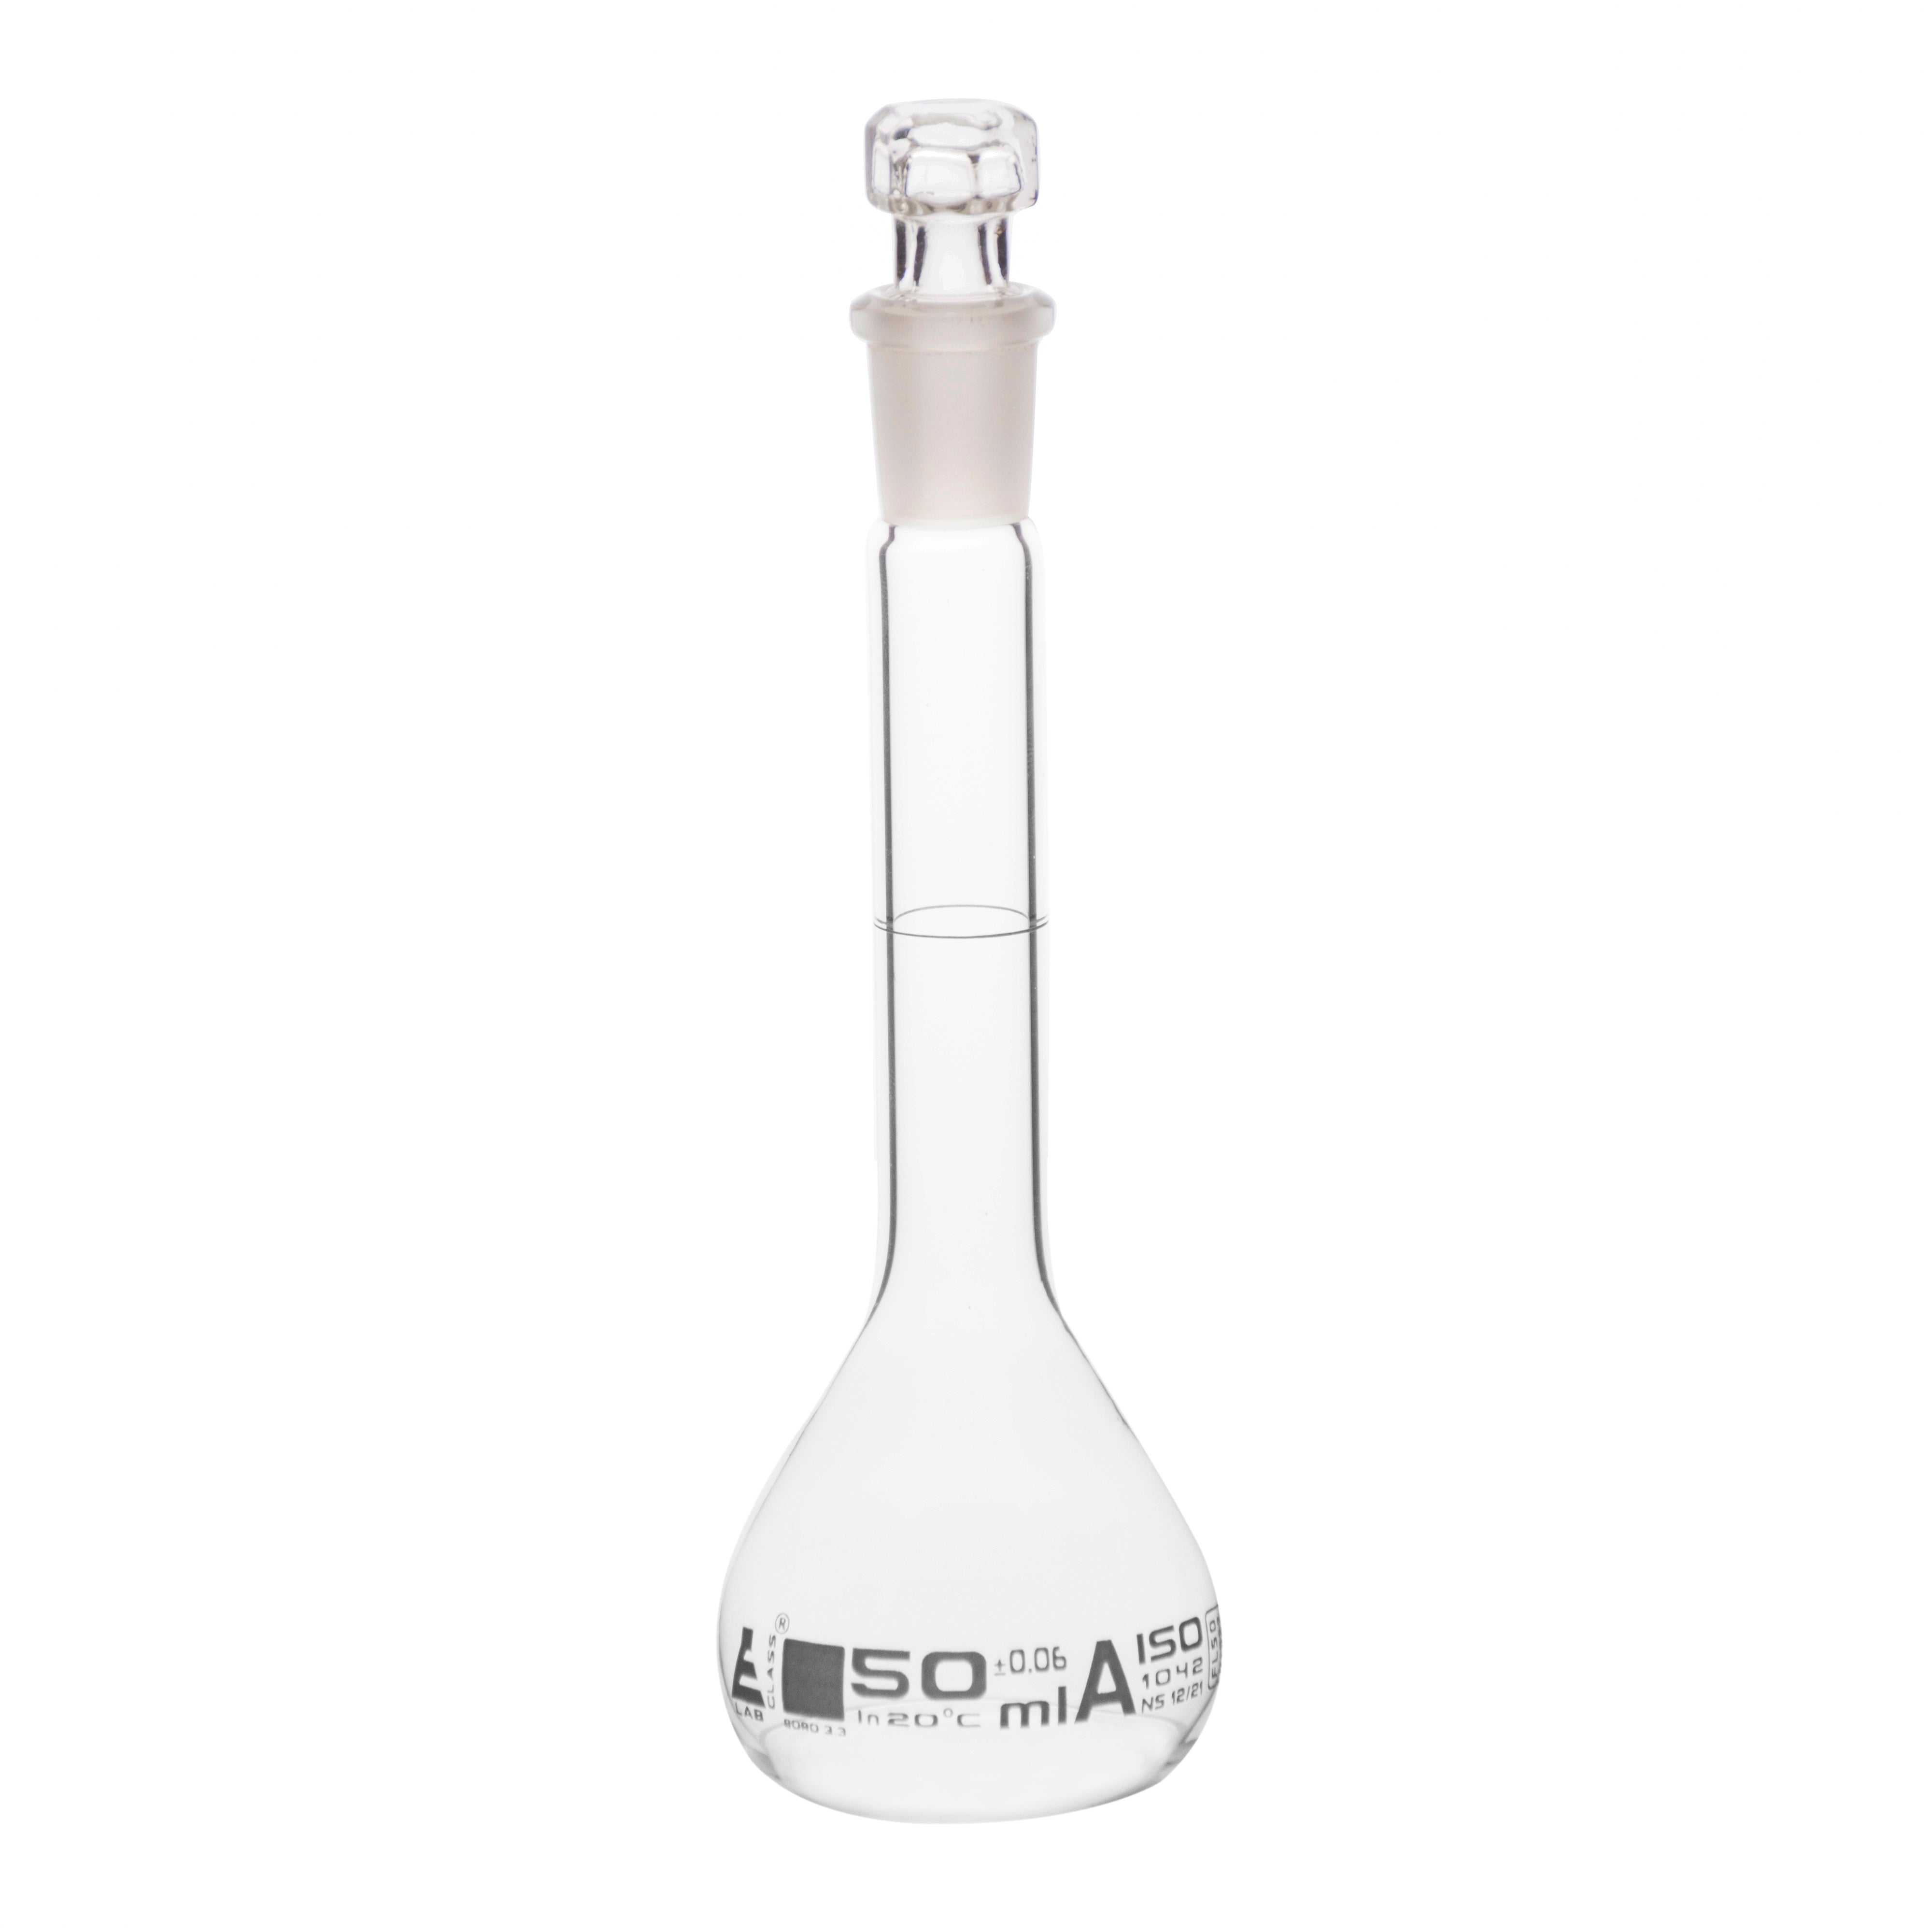 Borosilicate Volumetric Flask with Hollow Glass Stopper, 50ml, Class A, White Print, Autoclavable